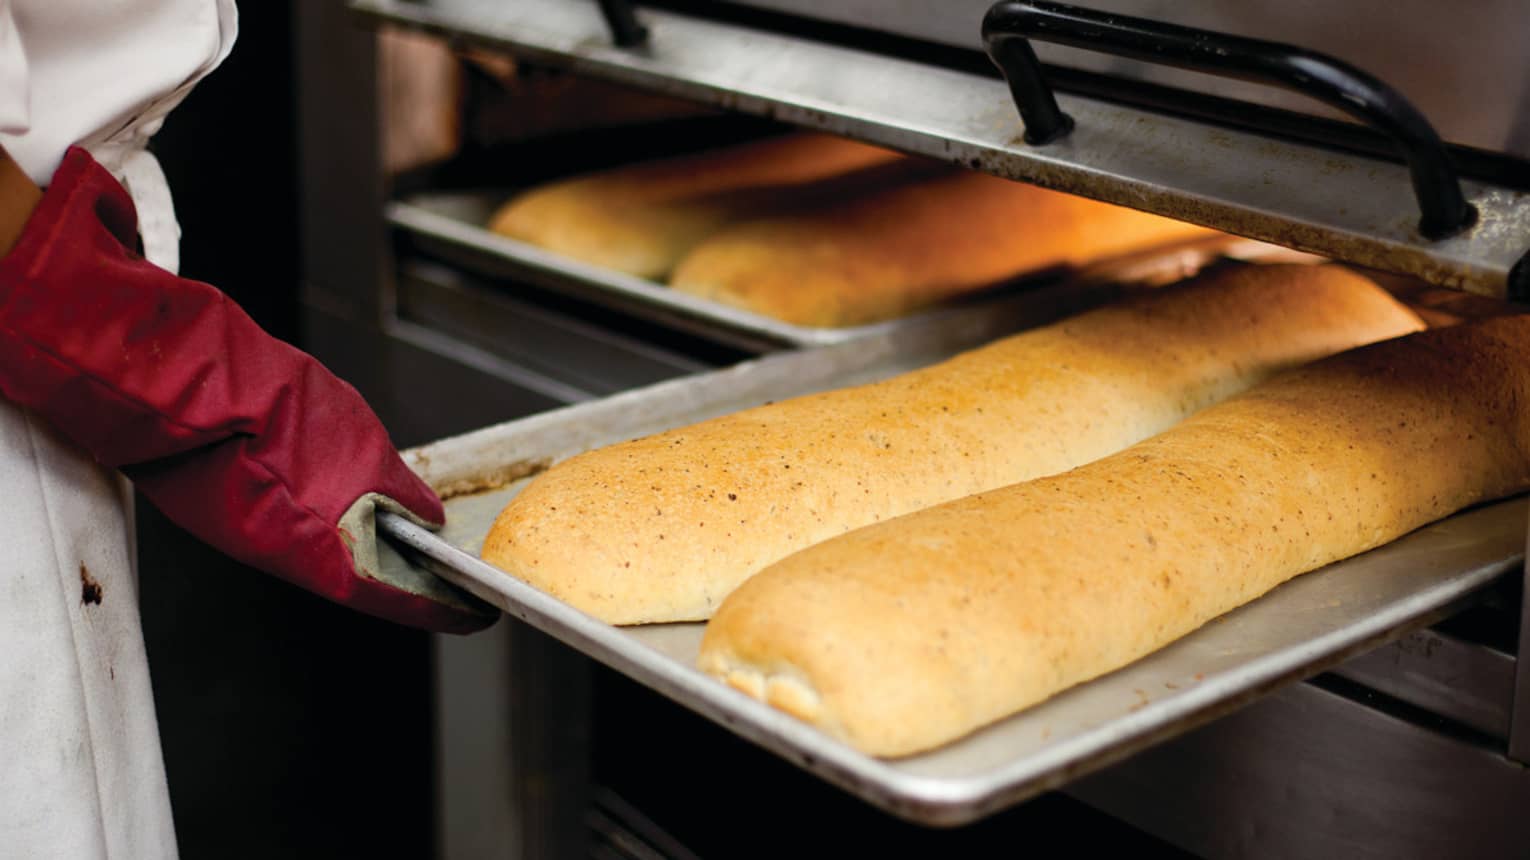 Chef wearing oven mitt removes tray with fresh baked bread from oven